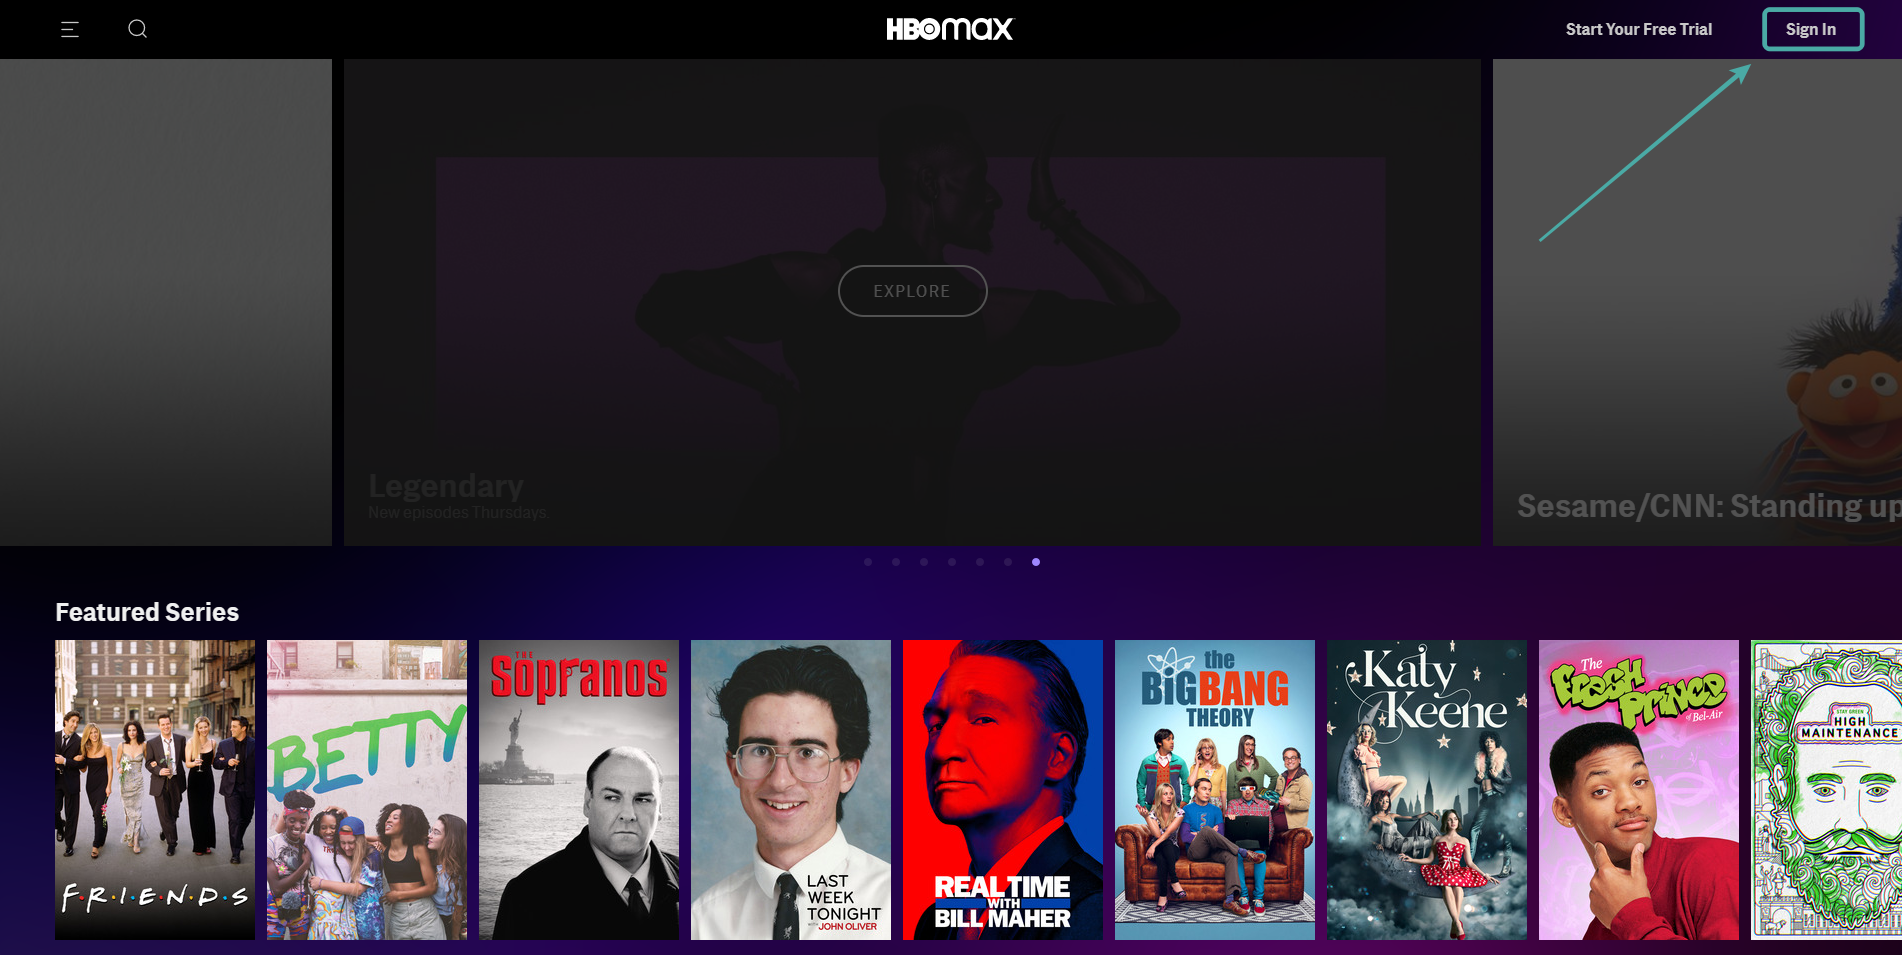 How to get HBO Max on Spectrum and where to watch?